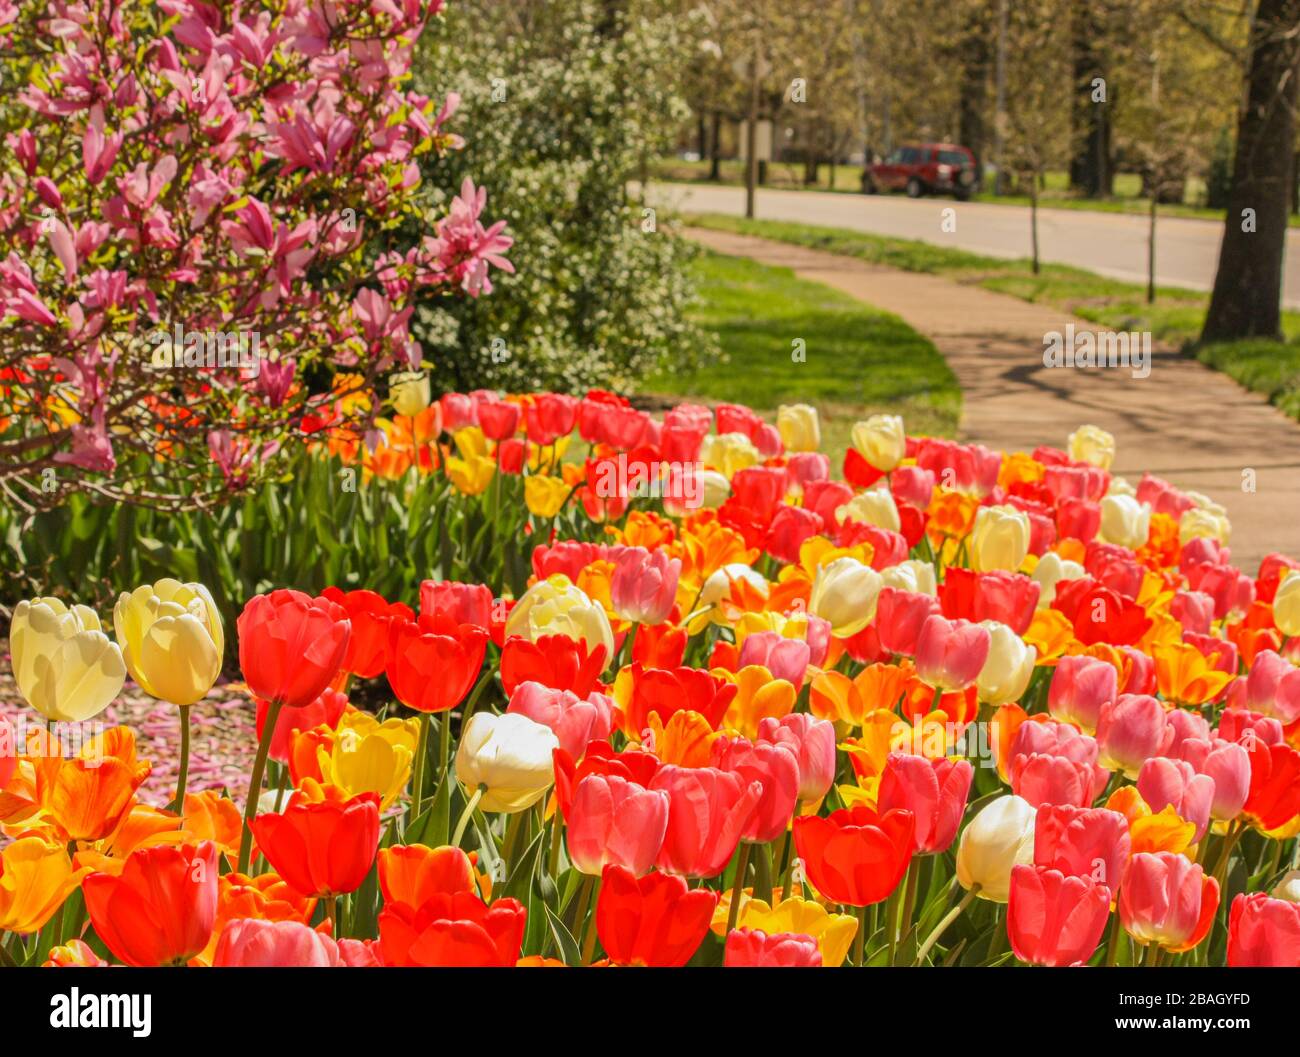 Rainbow colored tulips set against a blossoming tulip magnolia tree as a winding recreational walking and bike path leads the eye into the city park. Stock Photo